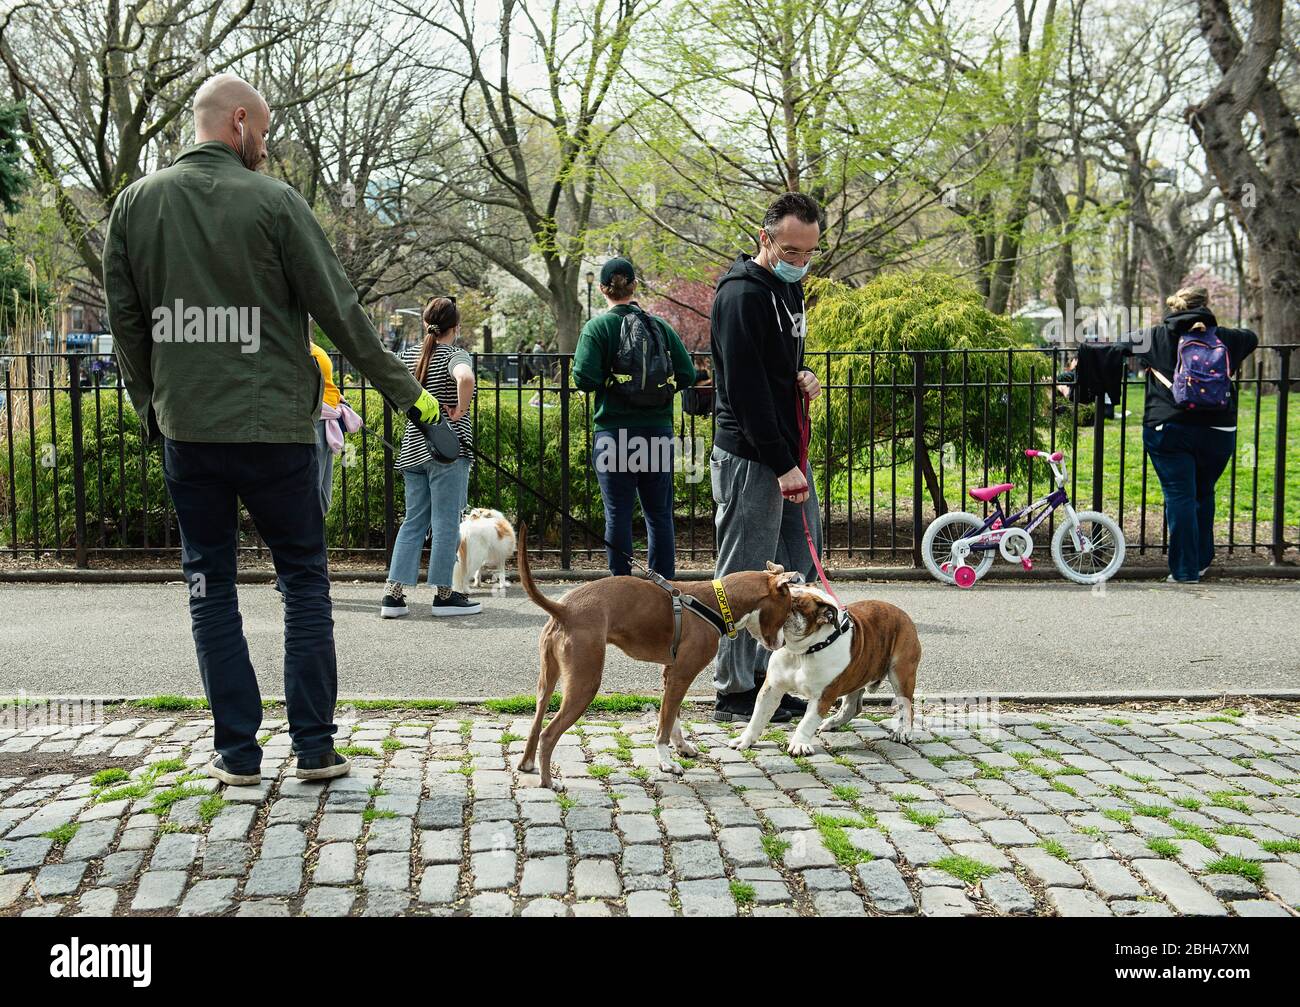 Dogs greeting each other at a park in New York City during the COVID 19 pandemic. Stock Photo